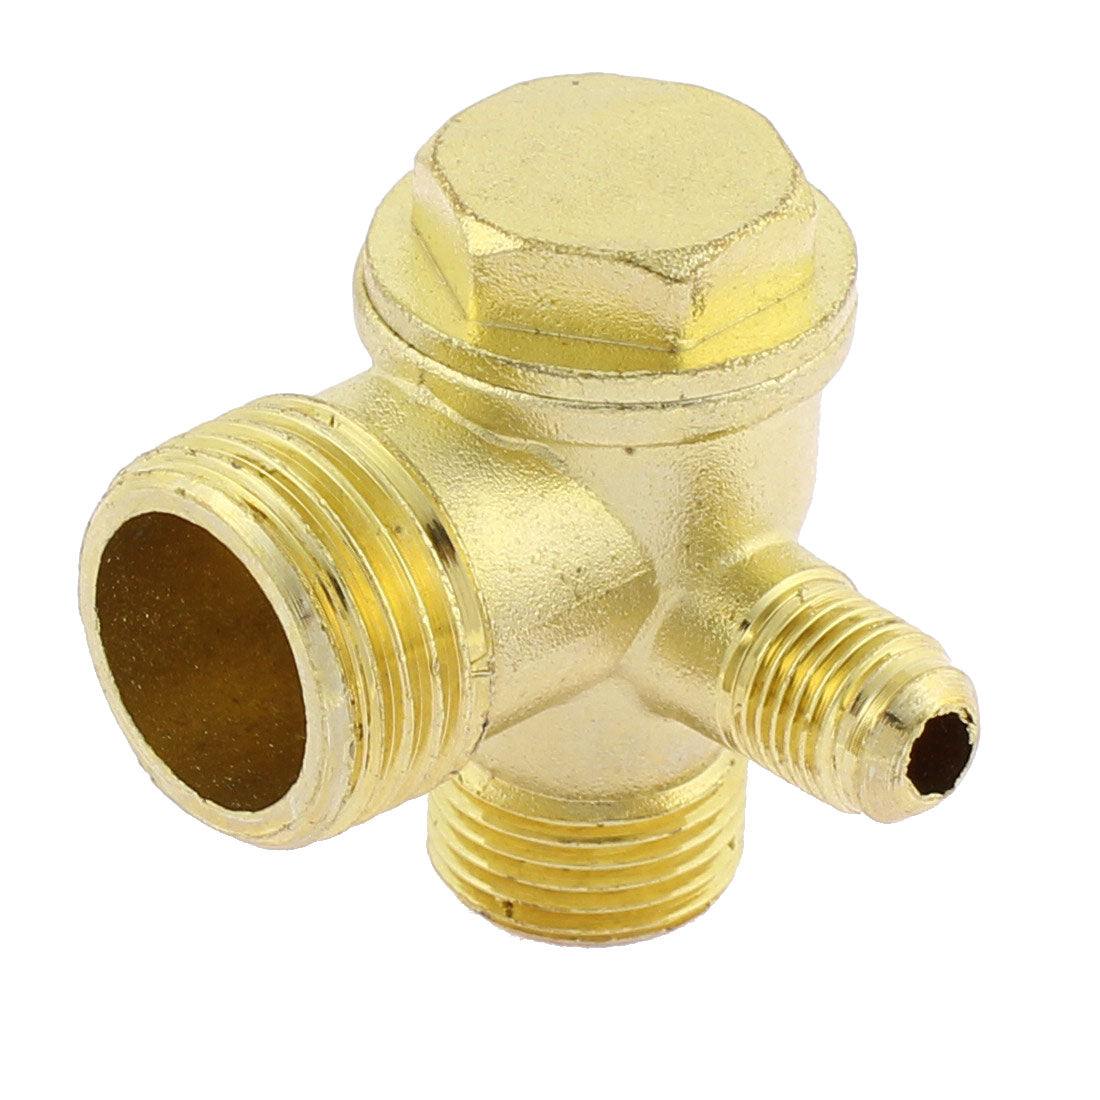 uxcell Uxcell 20mm Dia Male Thread Air Compressor Check Valve Replacement Parts